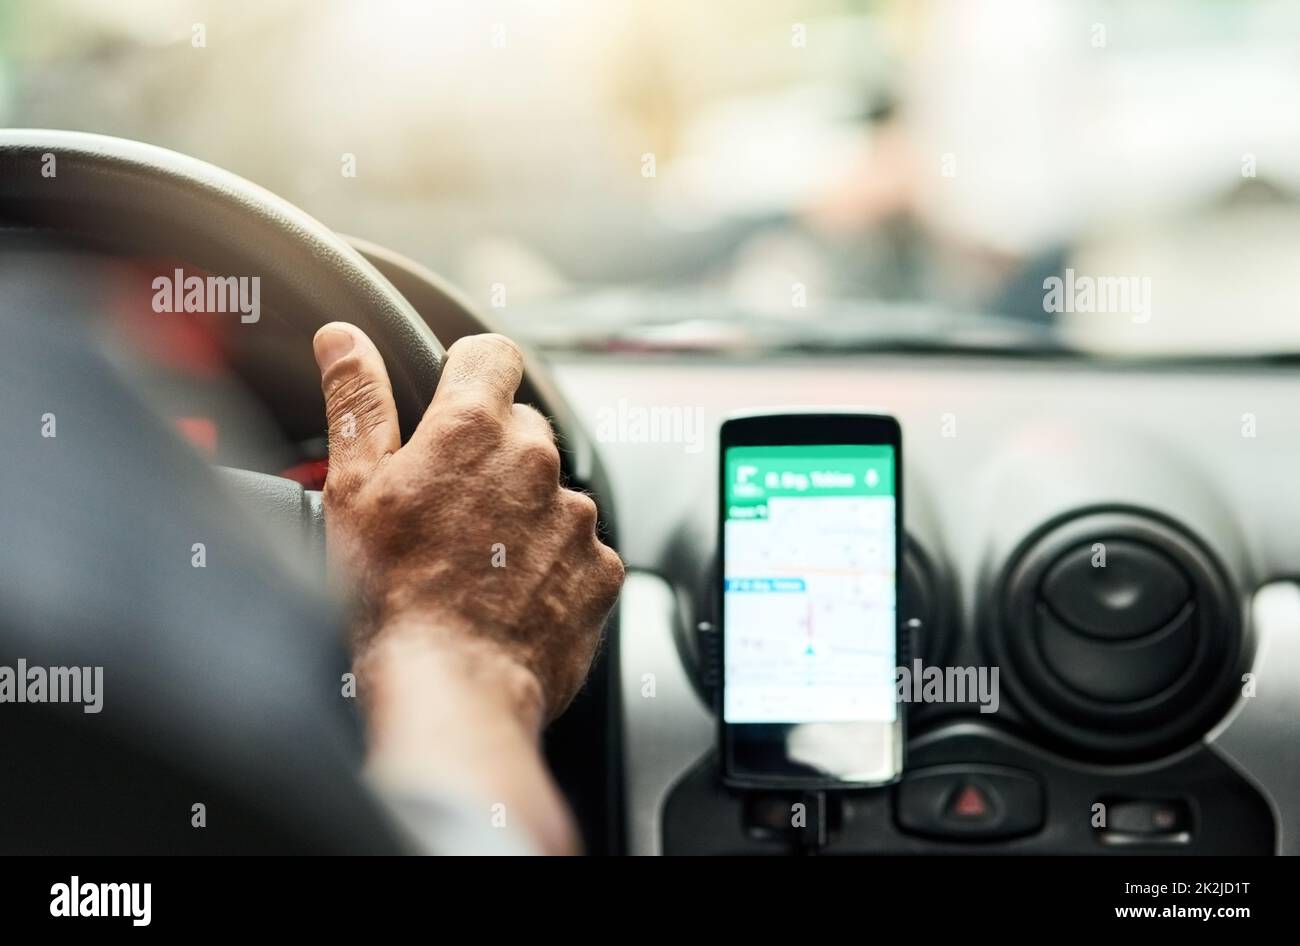 Youll never be lost with modern technology. Closeup shot of a man using a phone to find directions while driving. Stock Photo